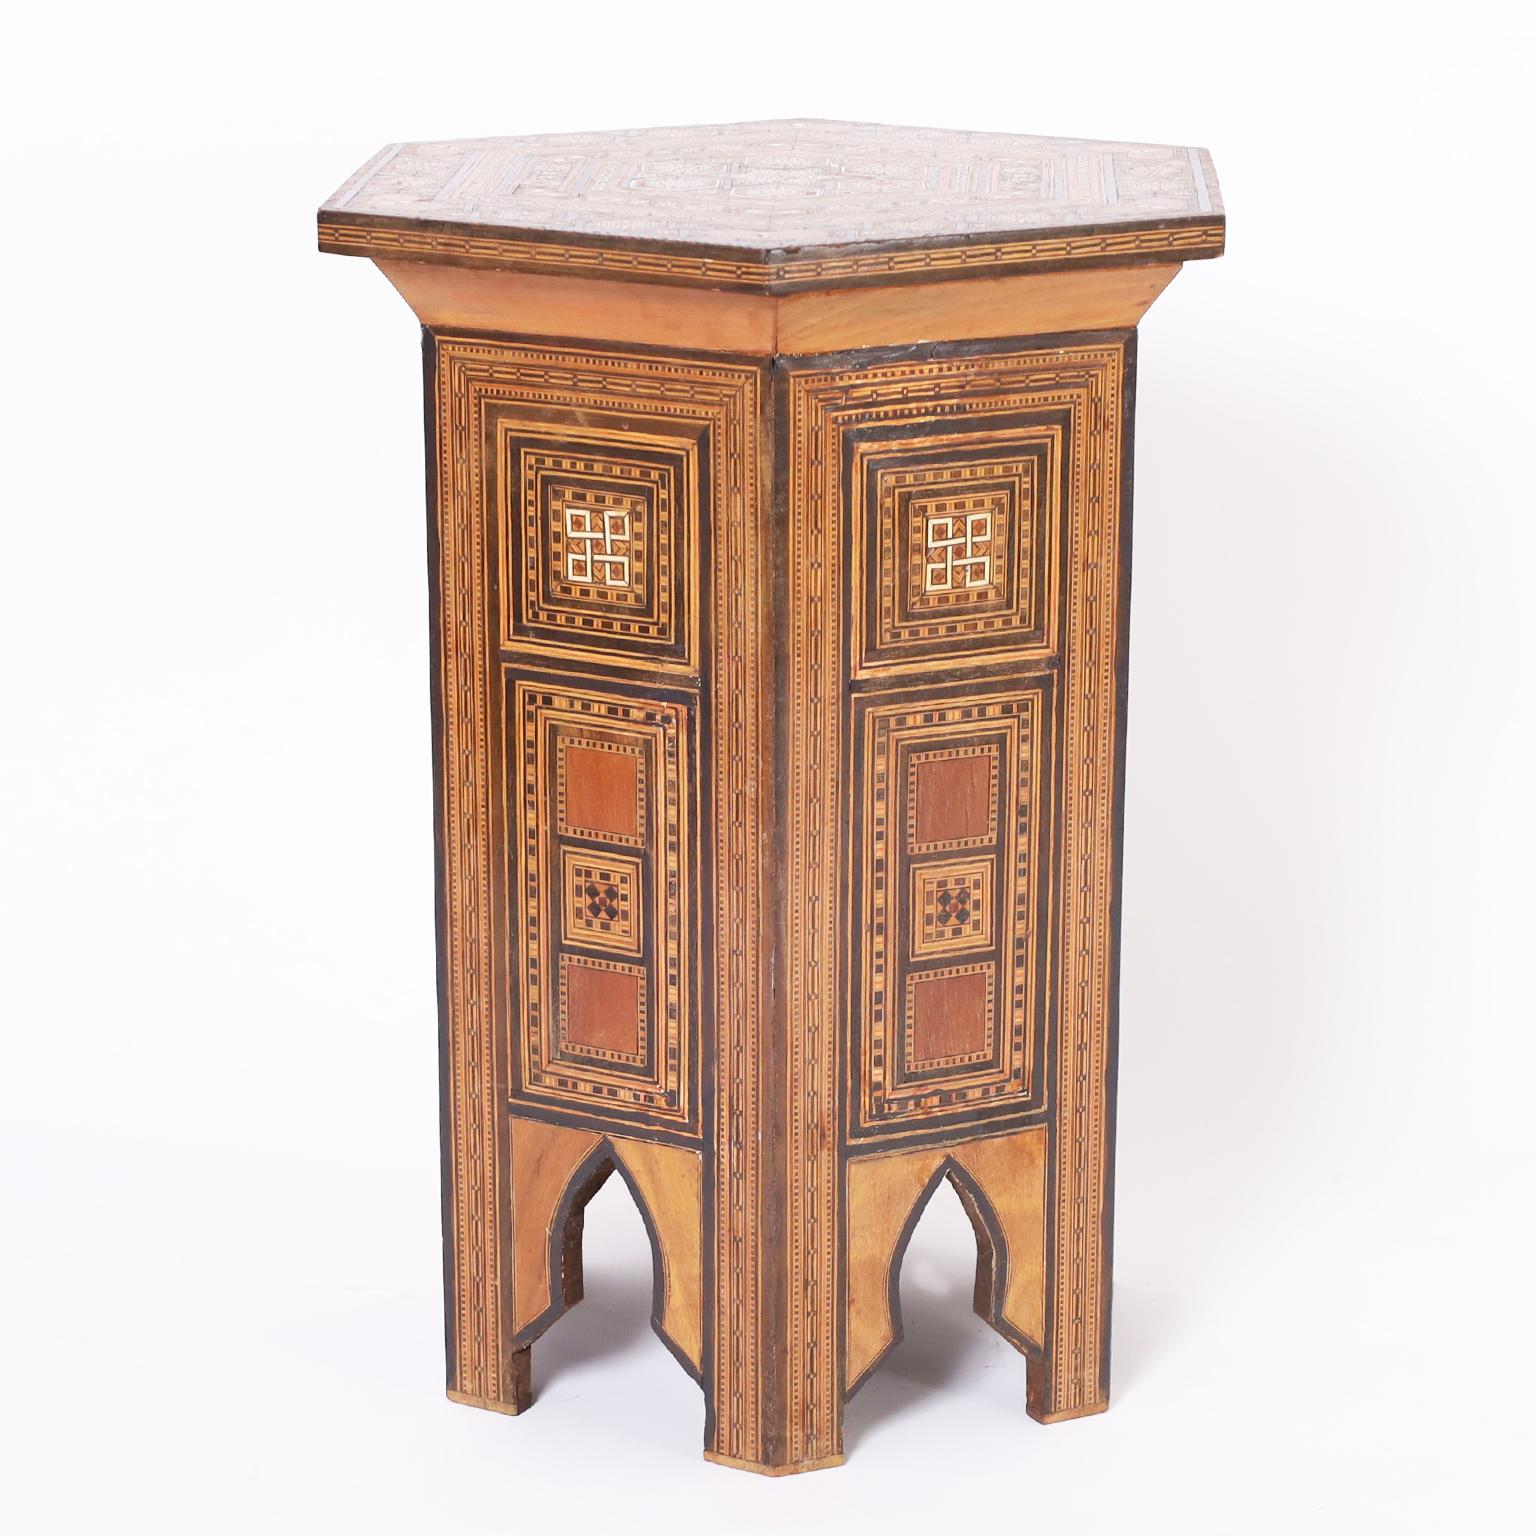 Standout antique Moroccan stand or table crafted in walnut in a hexagon form with elaborate inlaid micro mosaic marquetry composed of mother of pearl, bone, ebony and mahogany on the top and sides. The six legs are divided by moorish arches. As seen